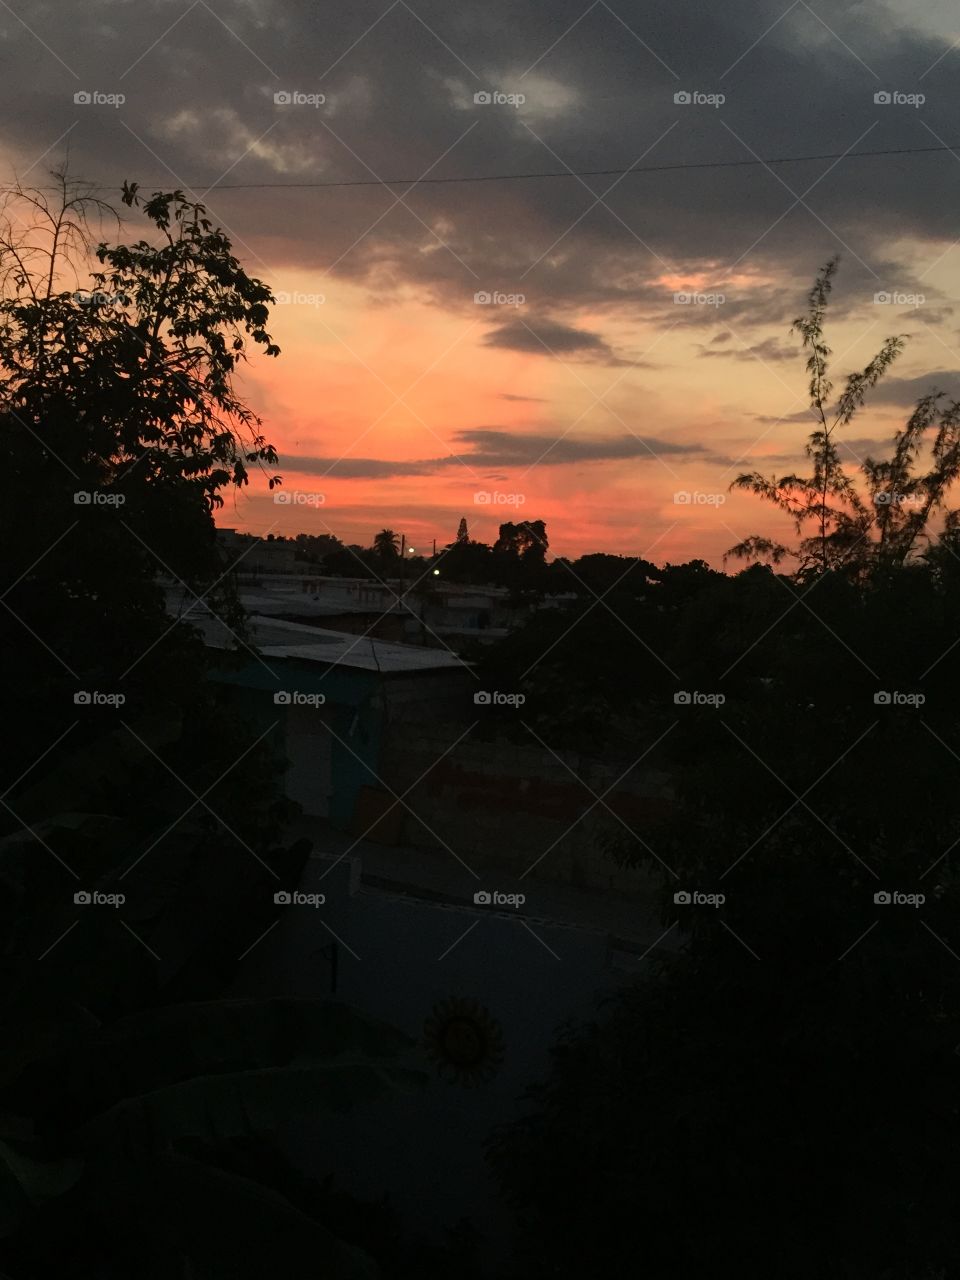 Sunset over Haitie. Finding beauty in the ashes